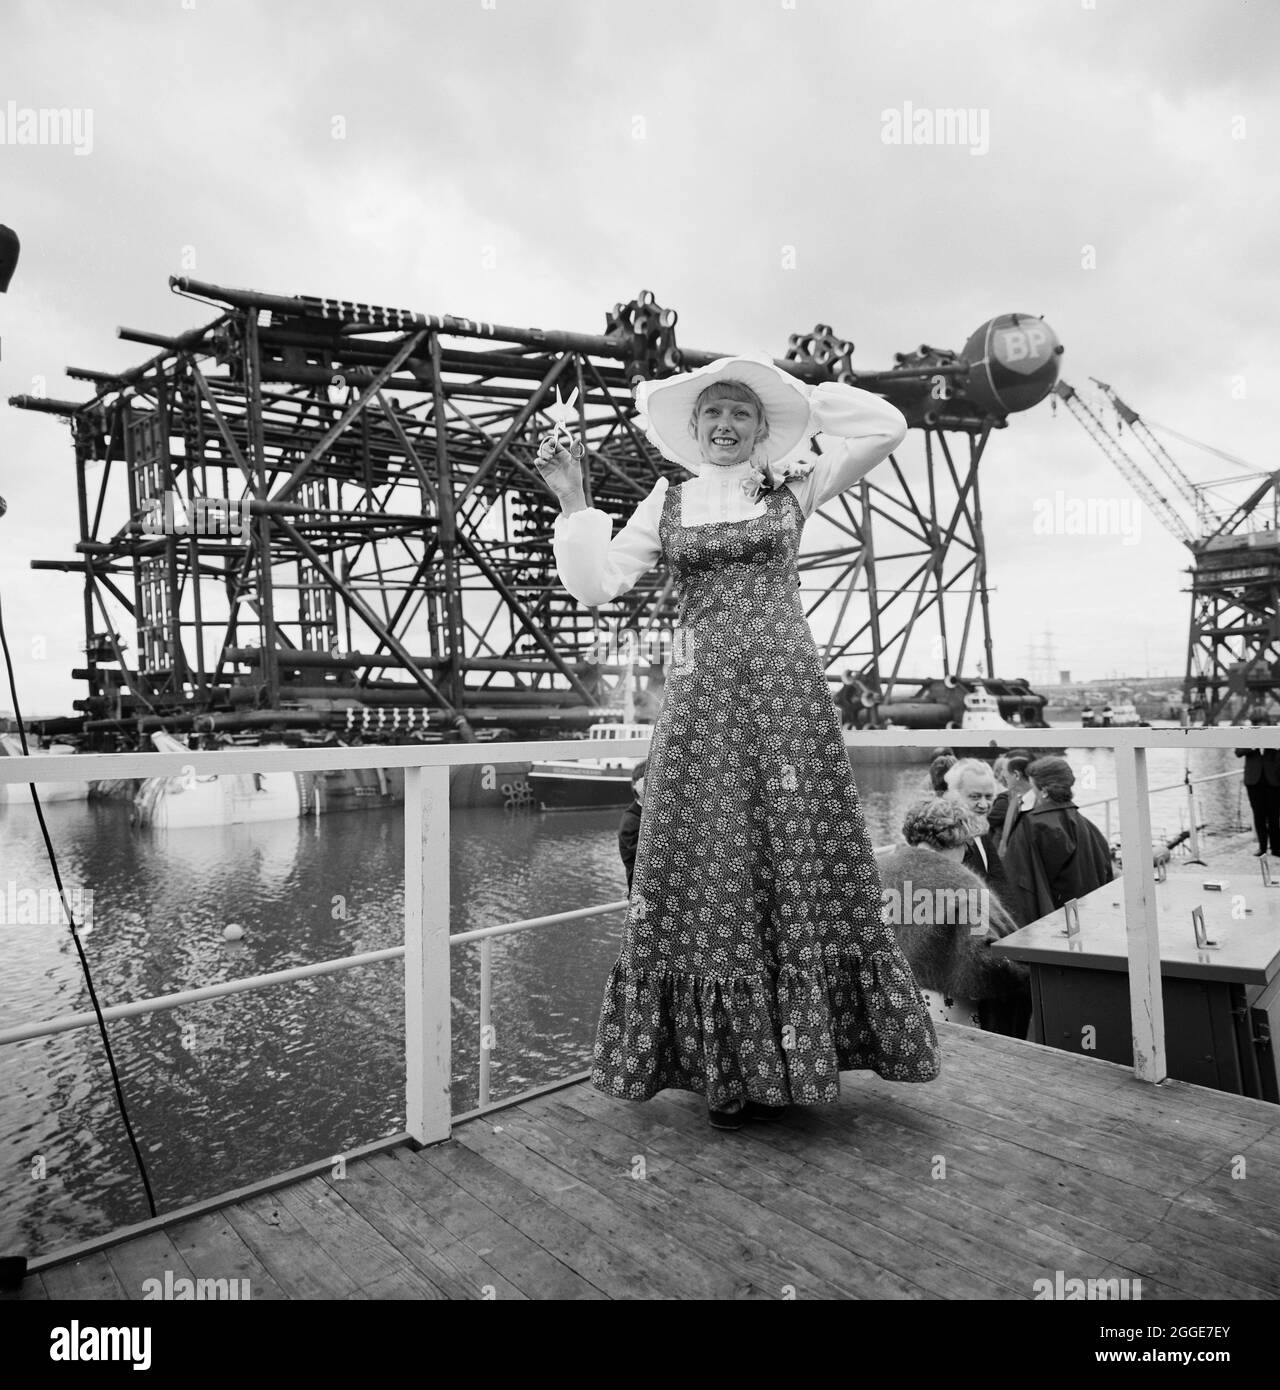 A young woman carrying out the naming ceremony for the oil platform Graythorp II. In the early 1970s Laing Pipelines Offshore constructed the Graythorp fabrication yard and dry dock on the site of the old William Gray Shipyard. The company created a dry dock which was used for the construction of fixed platform North Sea drilling rigs for the BP North Sea Oil Project. The oil platform Graythorp I was launched on Saturday 29th June 1974 and on the weekend of 14th-15th June 1975, Graythorp II was named and floated out of the dock basin down the Seaton Channel to where it was handed over to its o Stock Photo